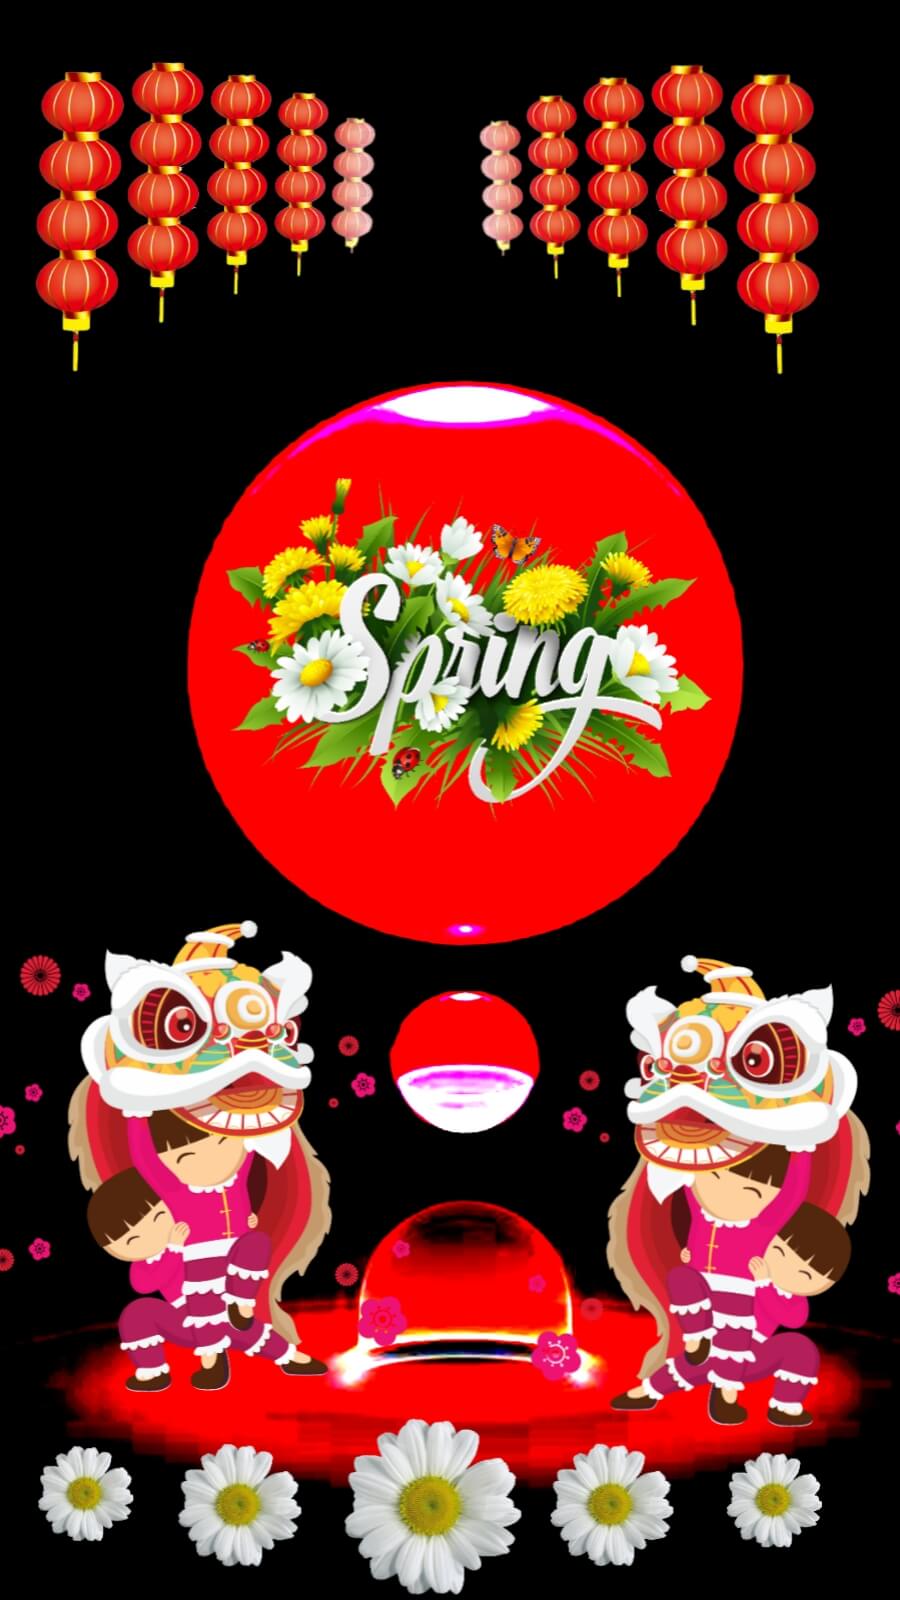 Best spring festival 2022 picture download